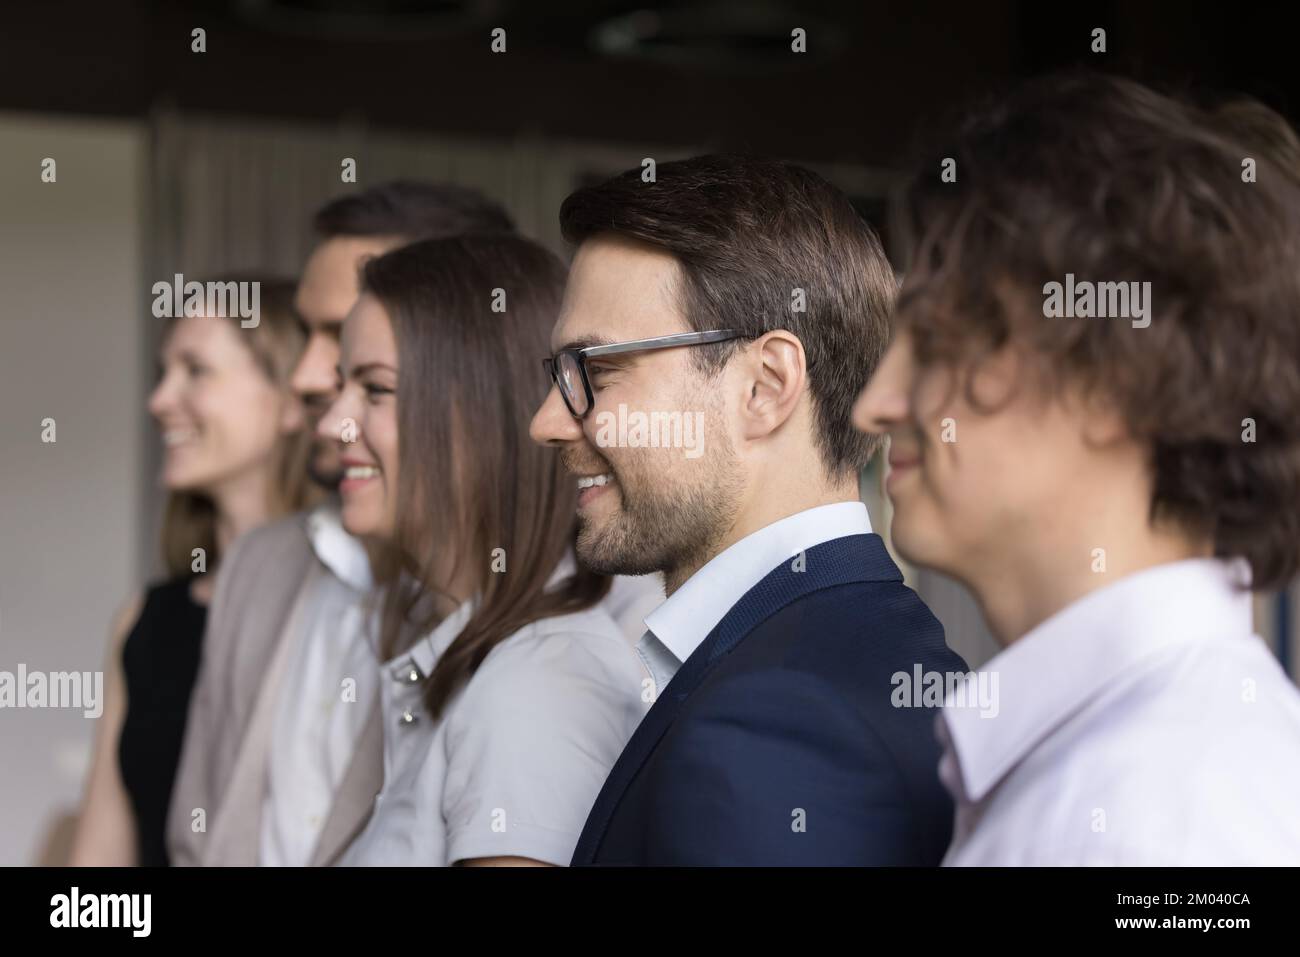 Businesspeople standing in row, look forward, side profile faces view Stock Photo